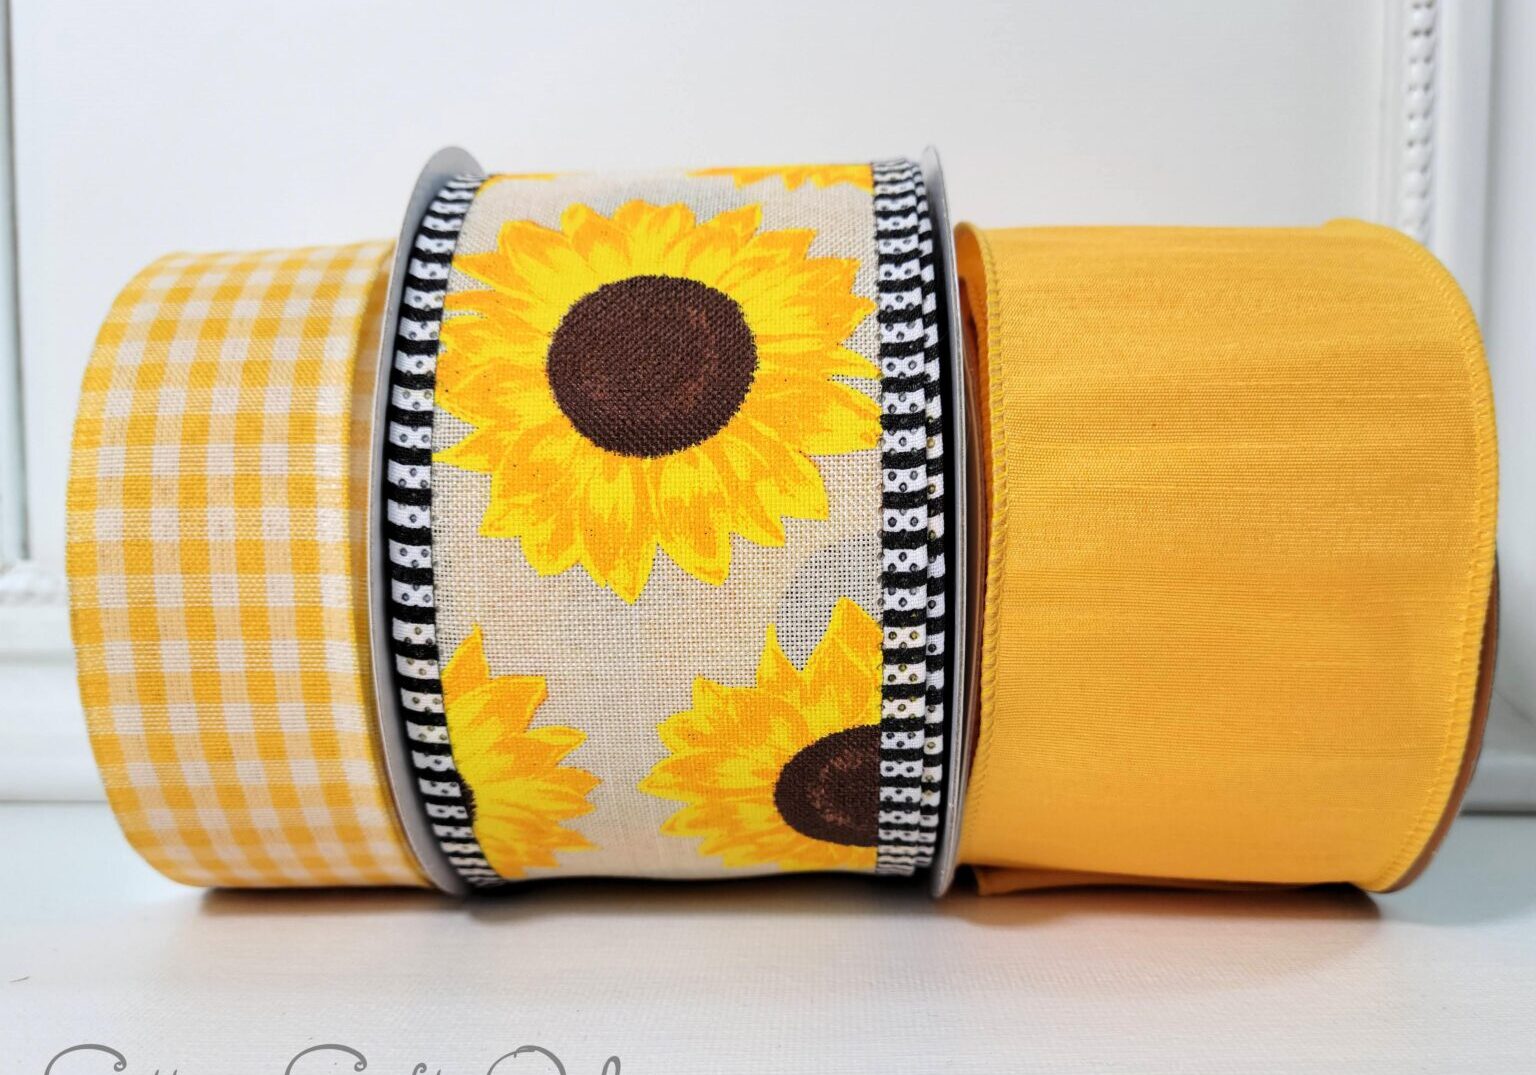 A yellow towel with sunflowers on it